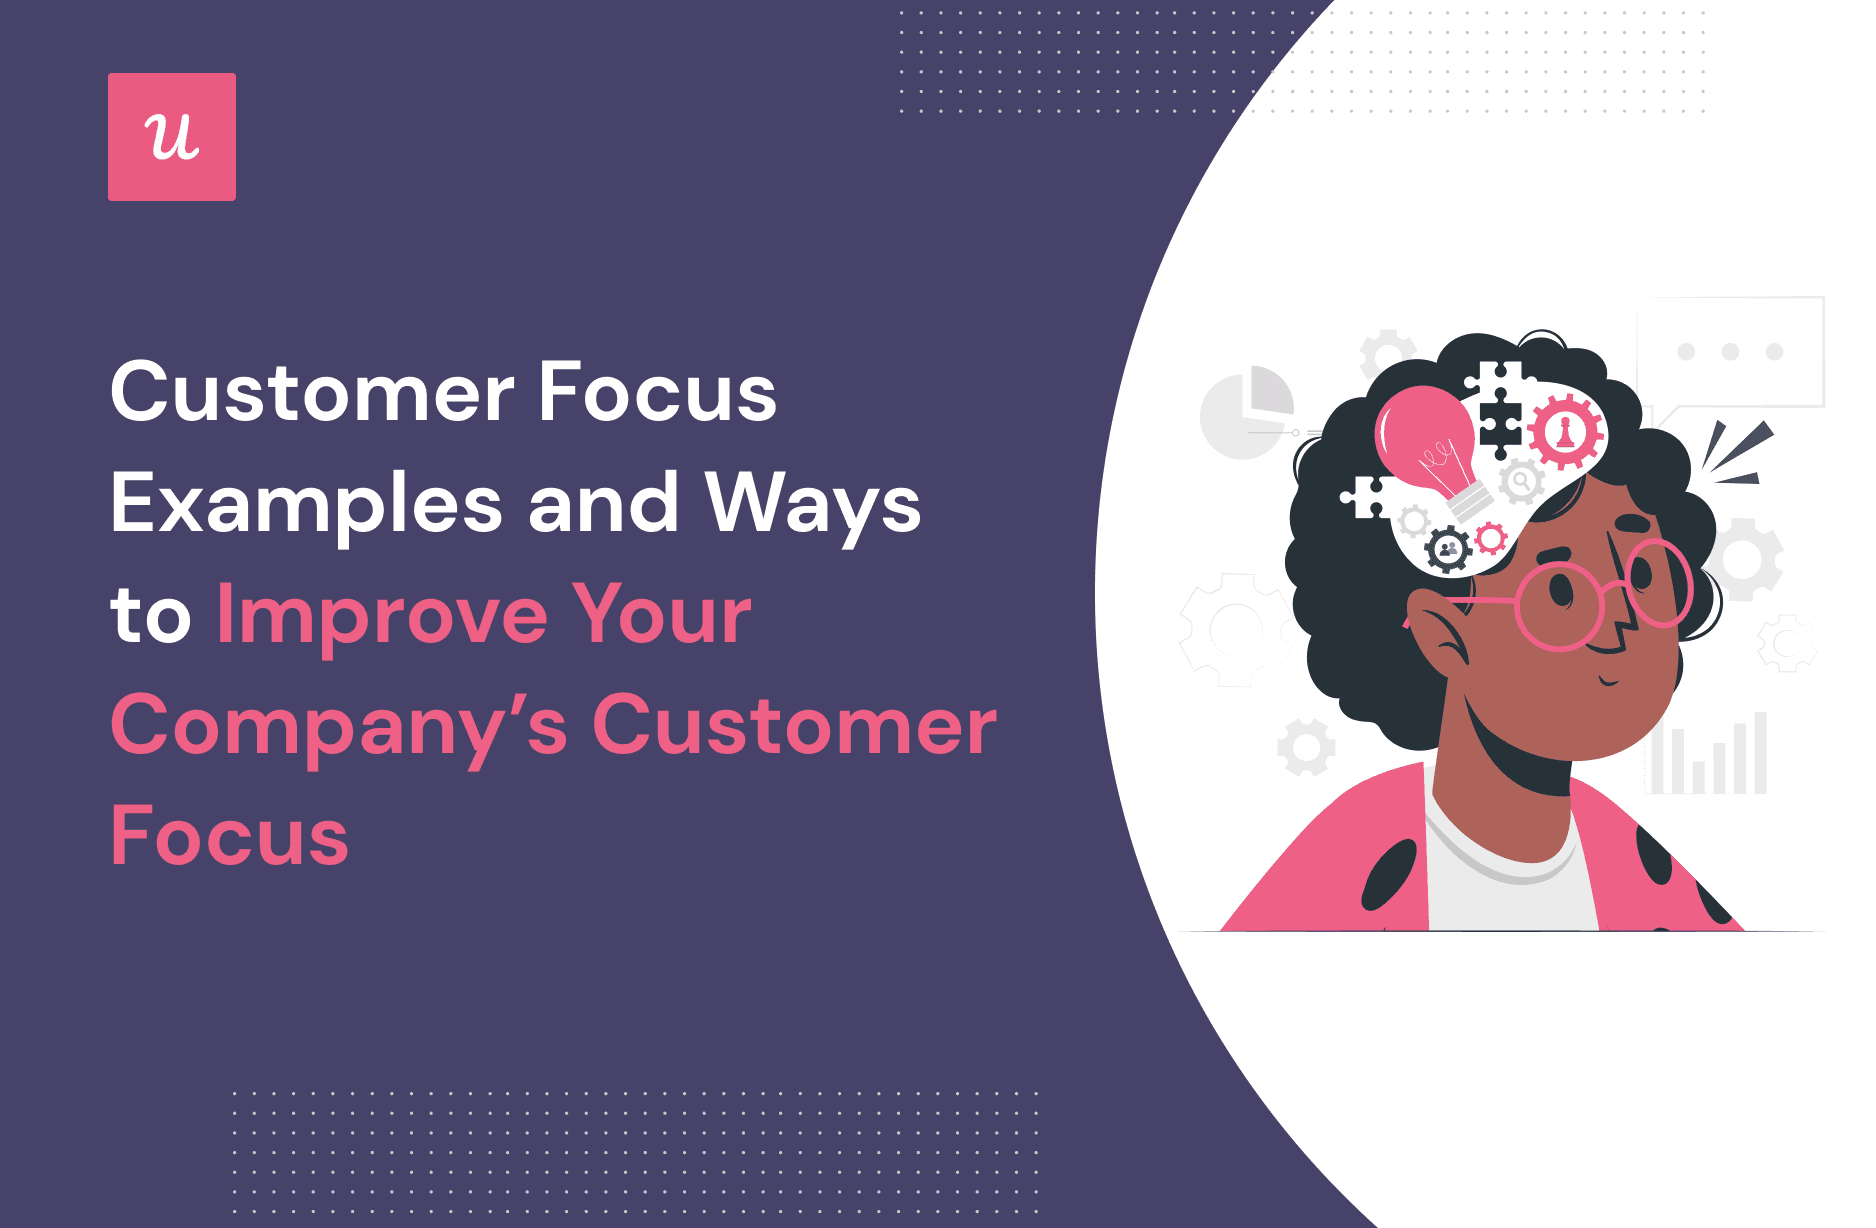 Customer Focus Examples and Ways to Improve Your Company’s Customer Focus cover